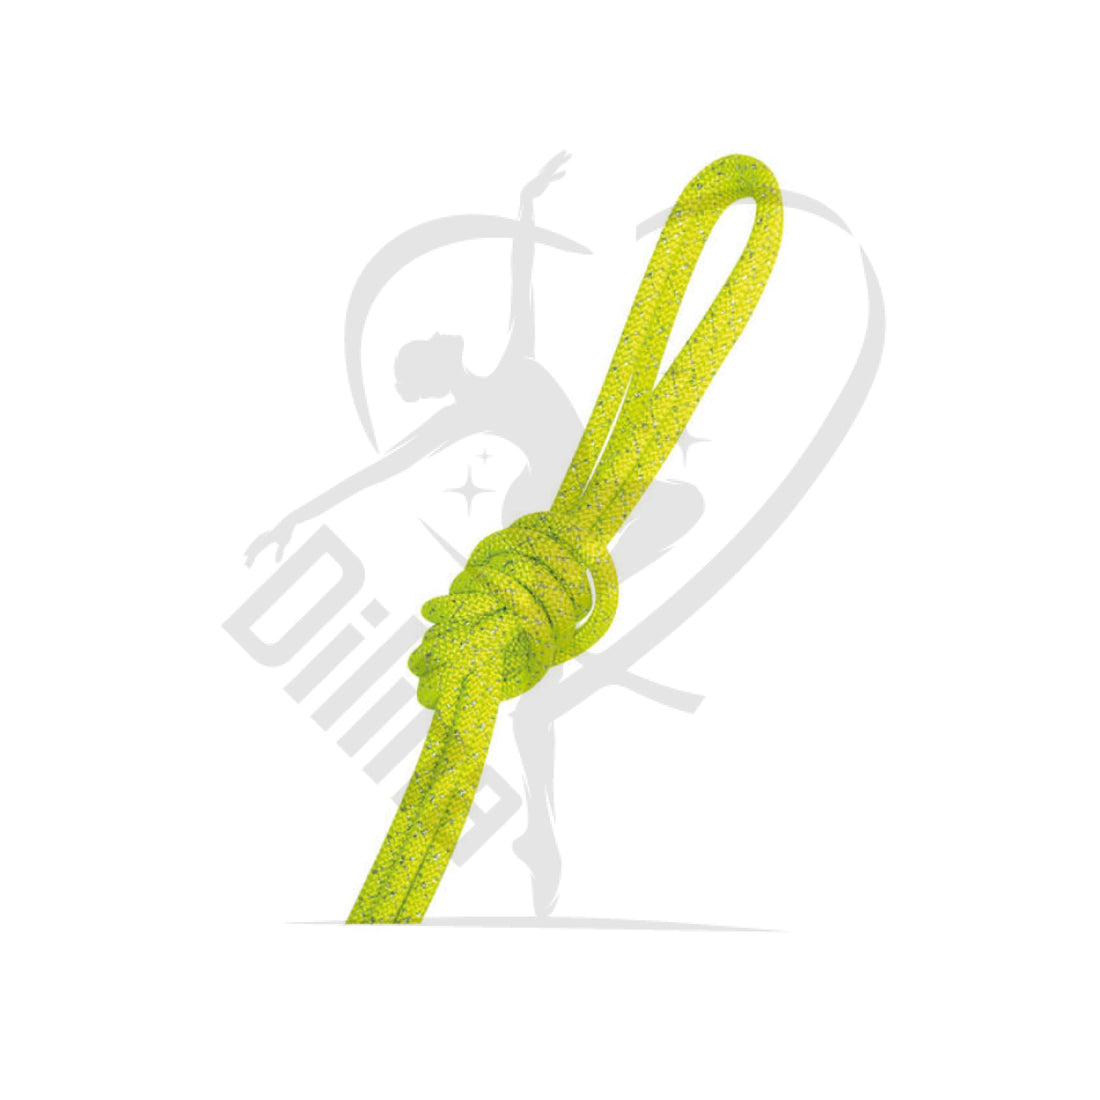 Pastorelli Metallic Gym Rope For Competitions Mod. New Orleans Fluo Yellow With Silver Lame Threads